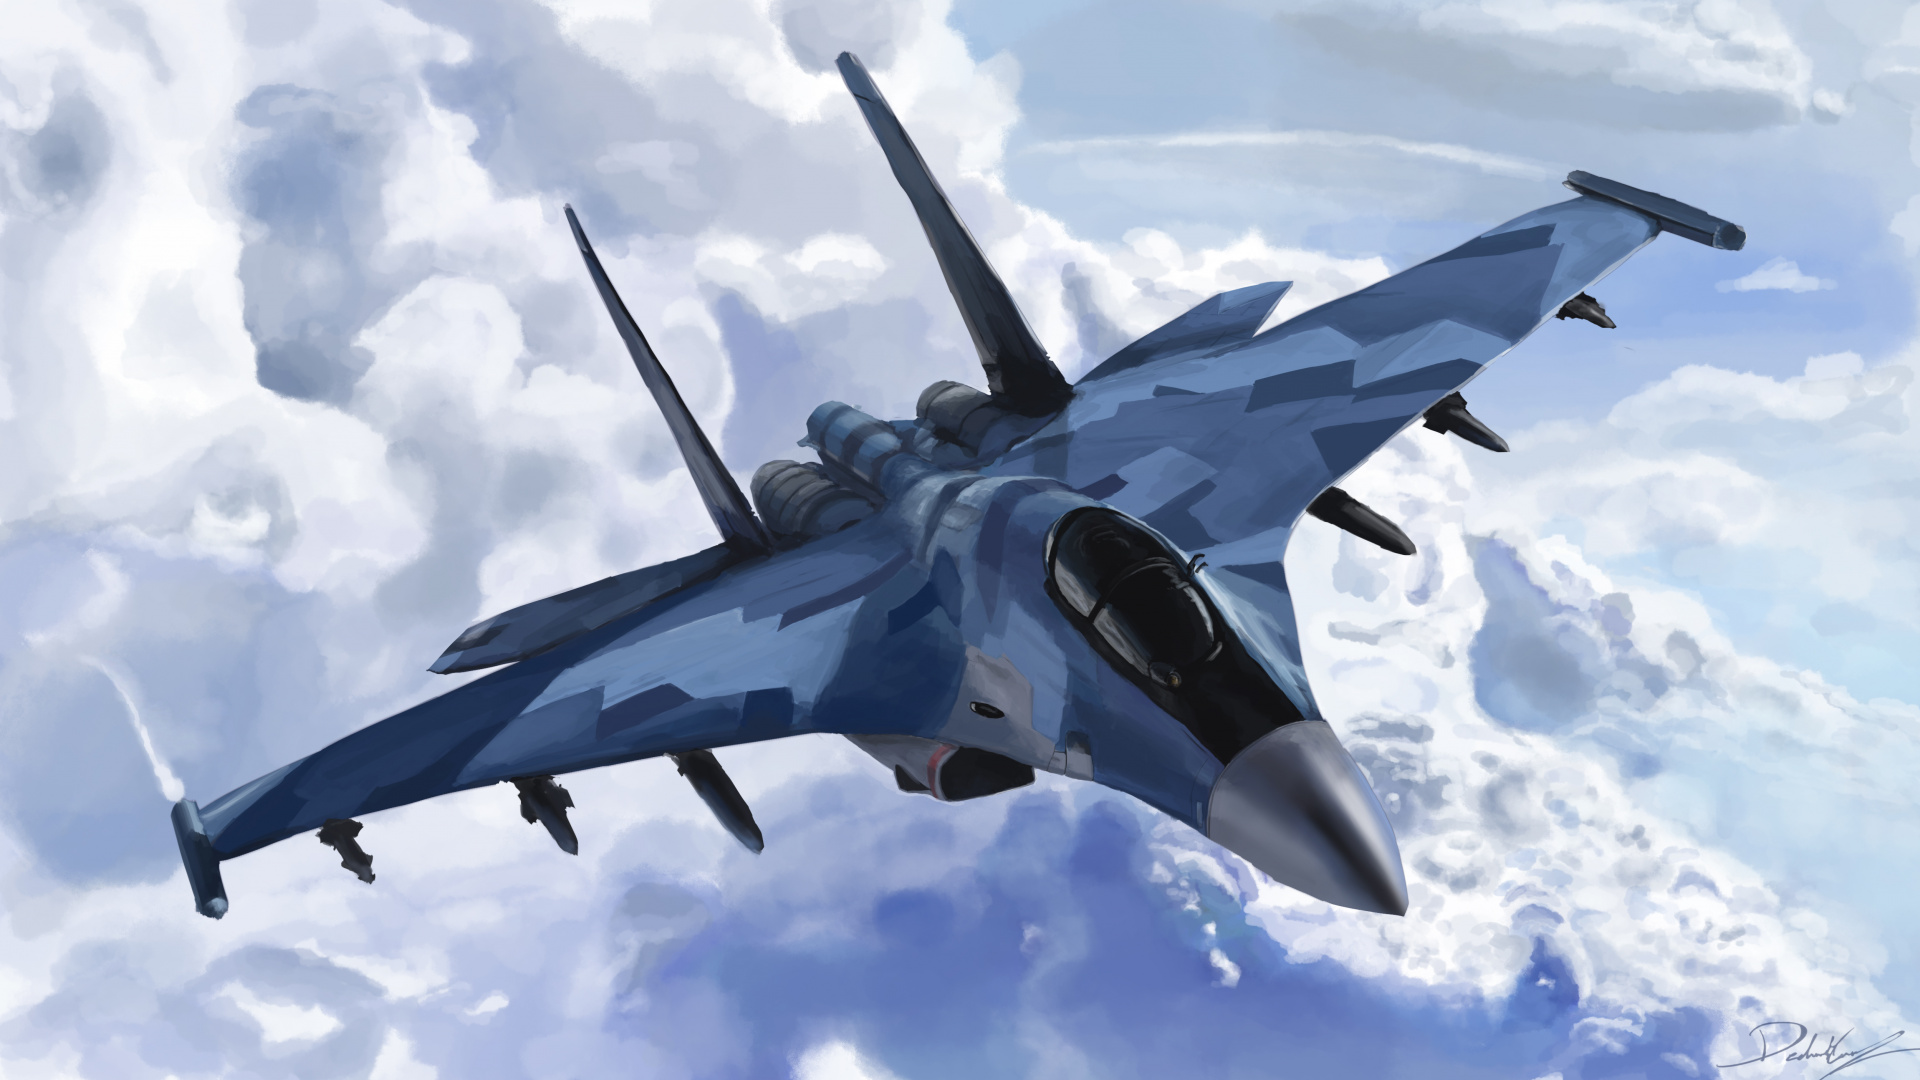 Gray Fighter Jet Flying in The Sky. Wallpaper in 1920x1080 Resolution